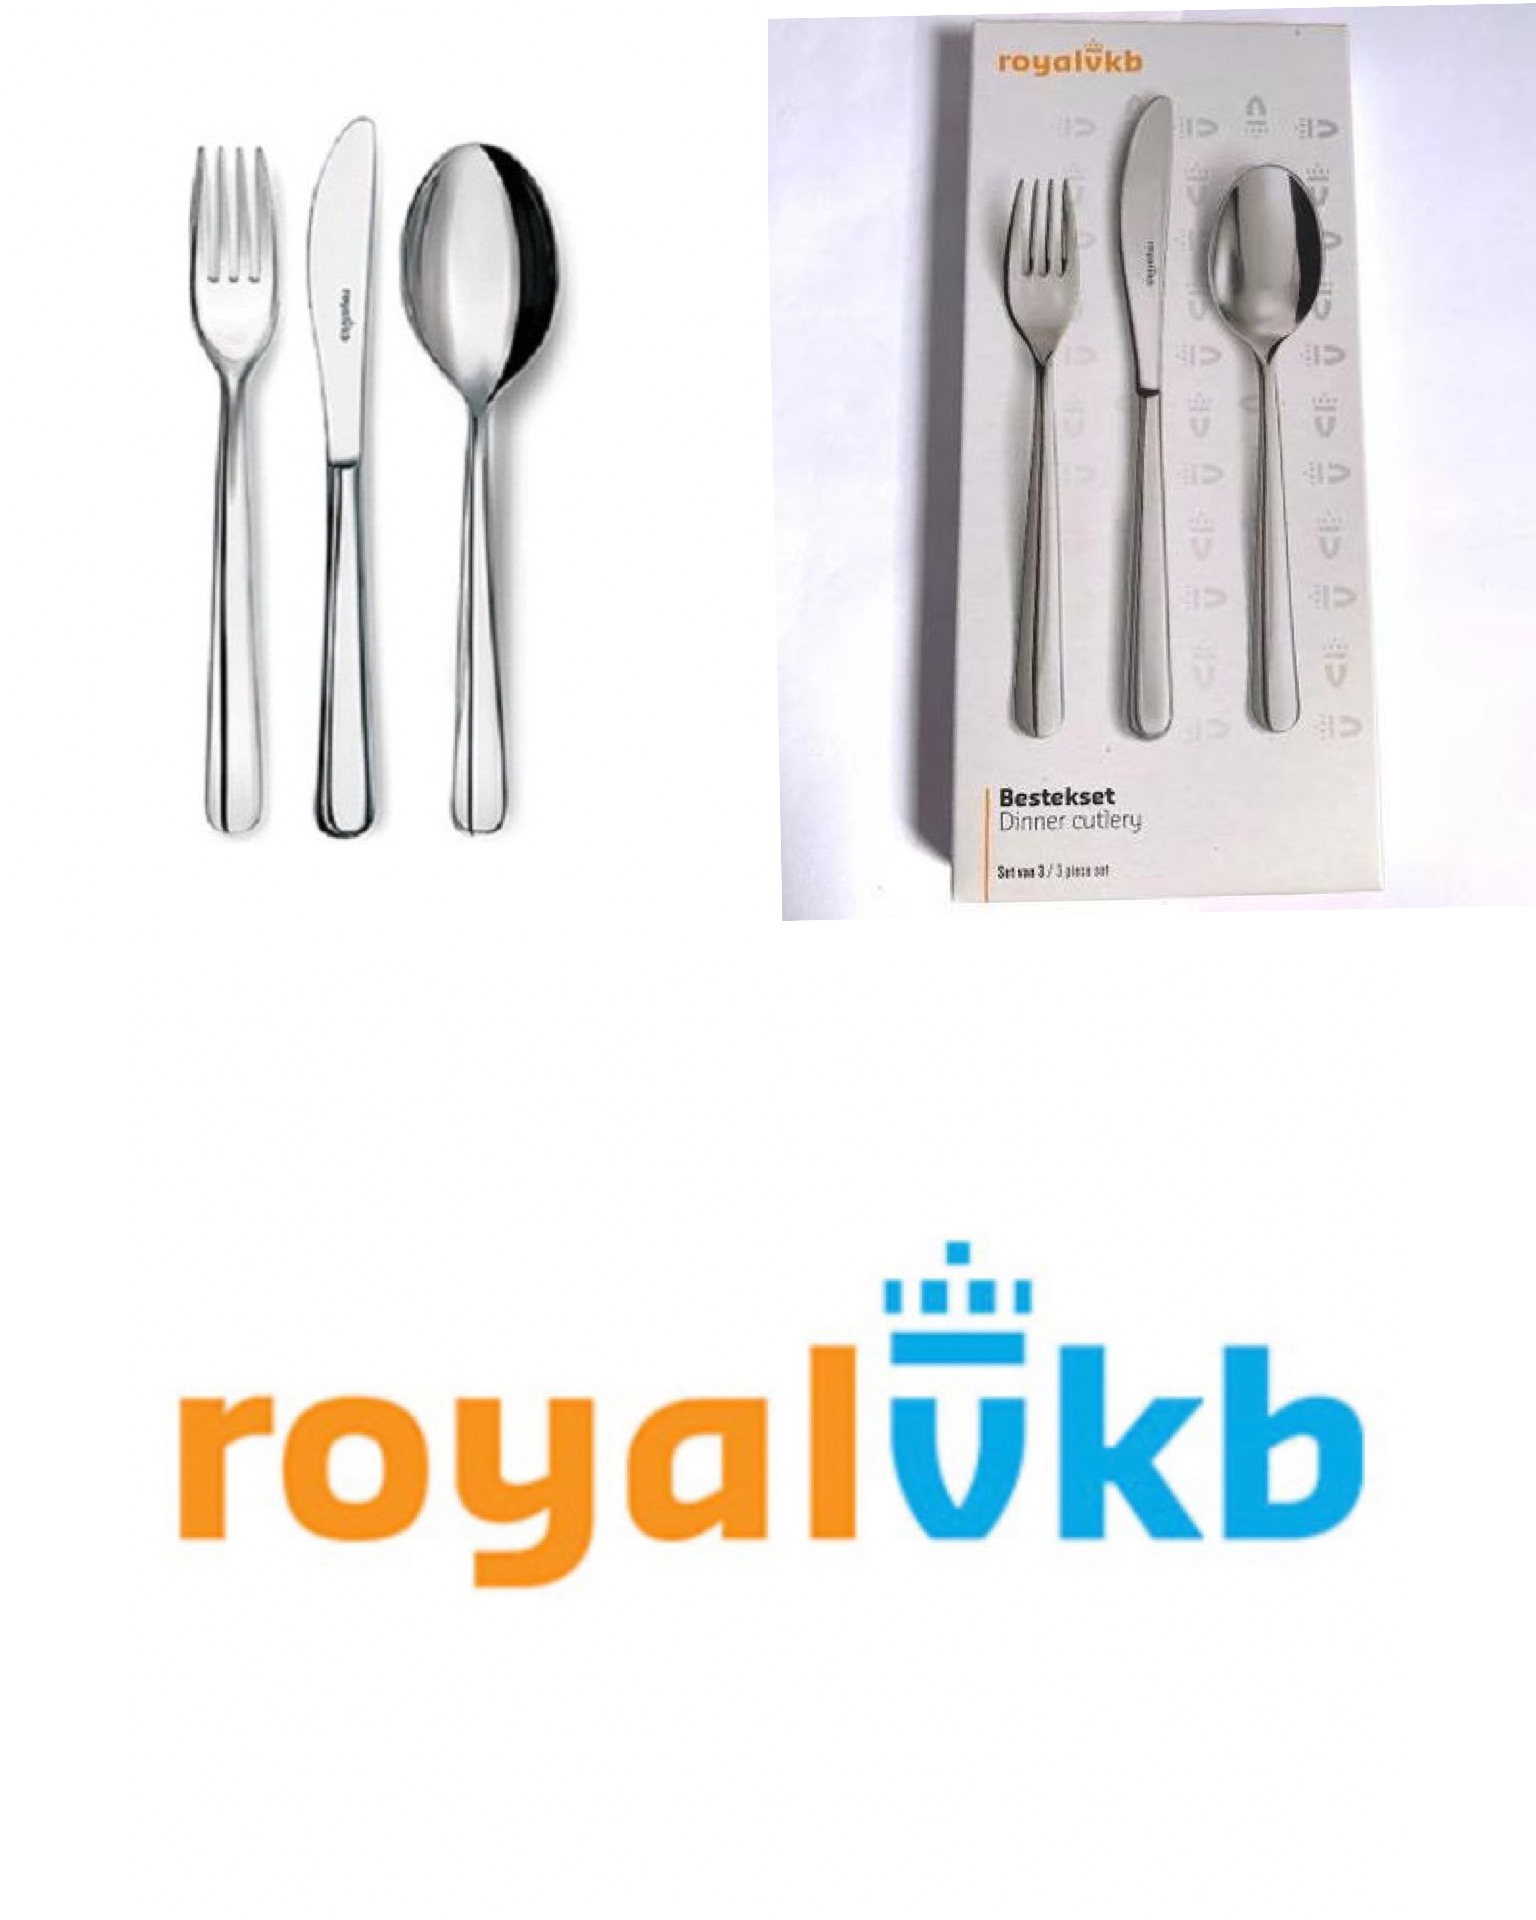 54680 - *Royal Vkb* 3-piece table cutlery set Europe